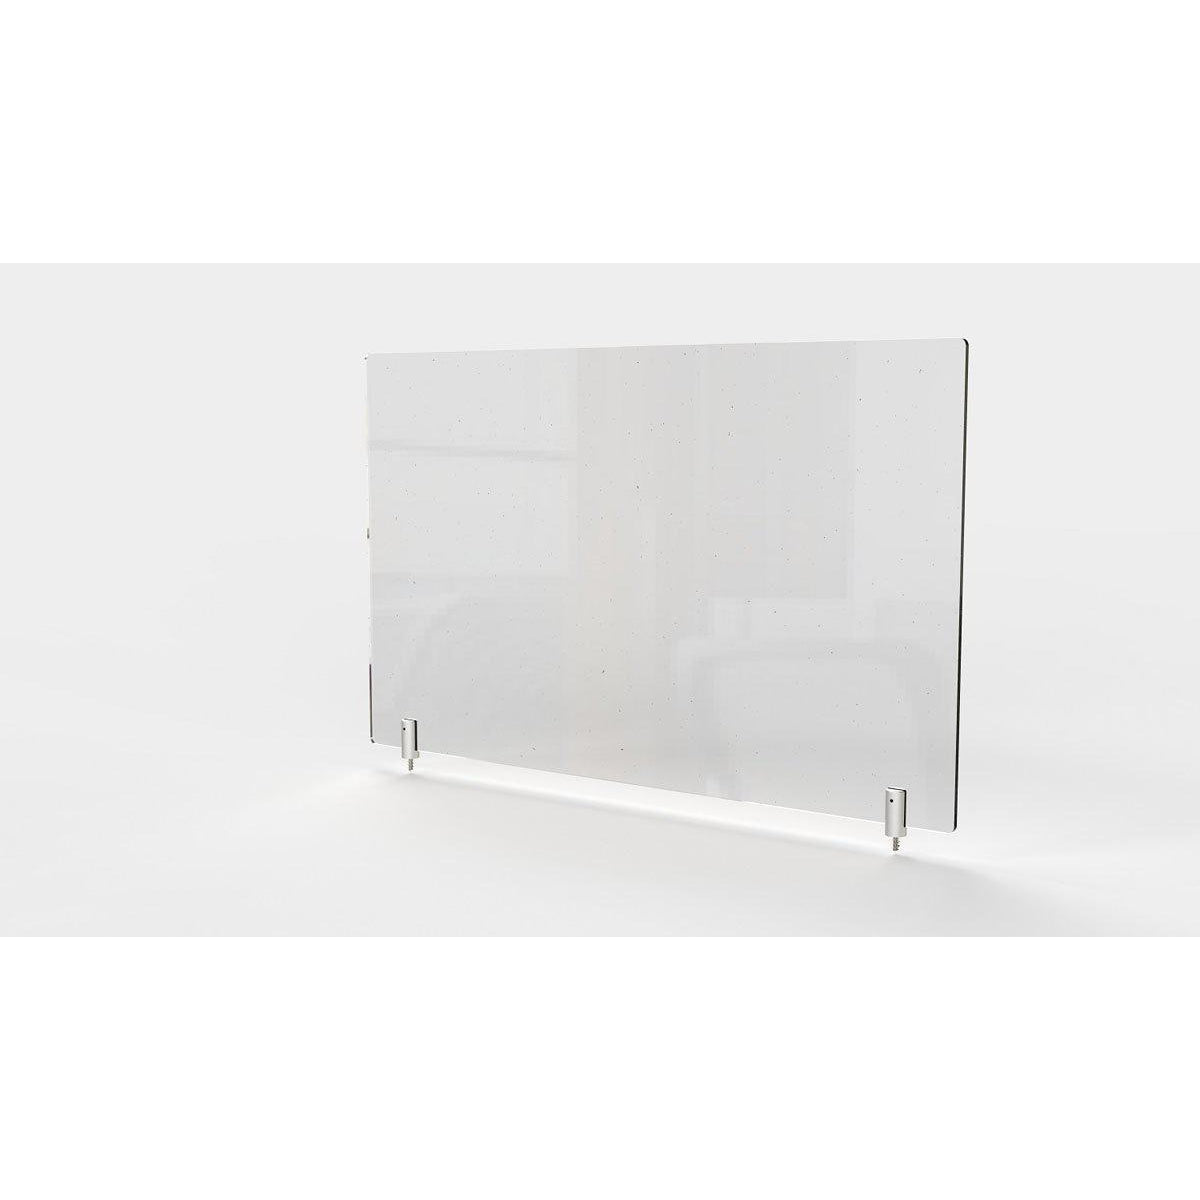 Clear Thermoplastic Partition & Cubicle Extender with Permanent Screw Attachment, 24"H x 36"W